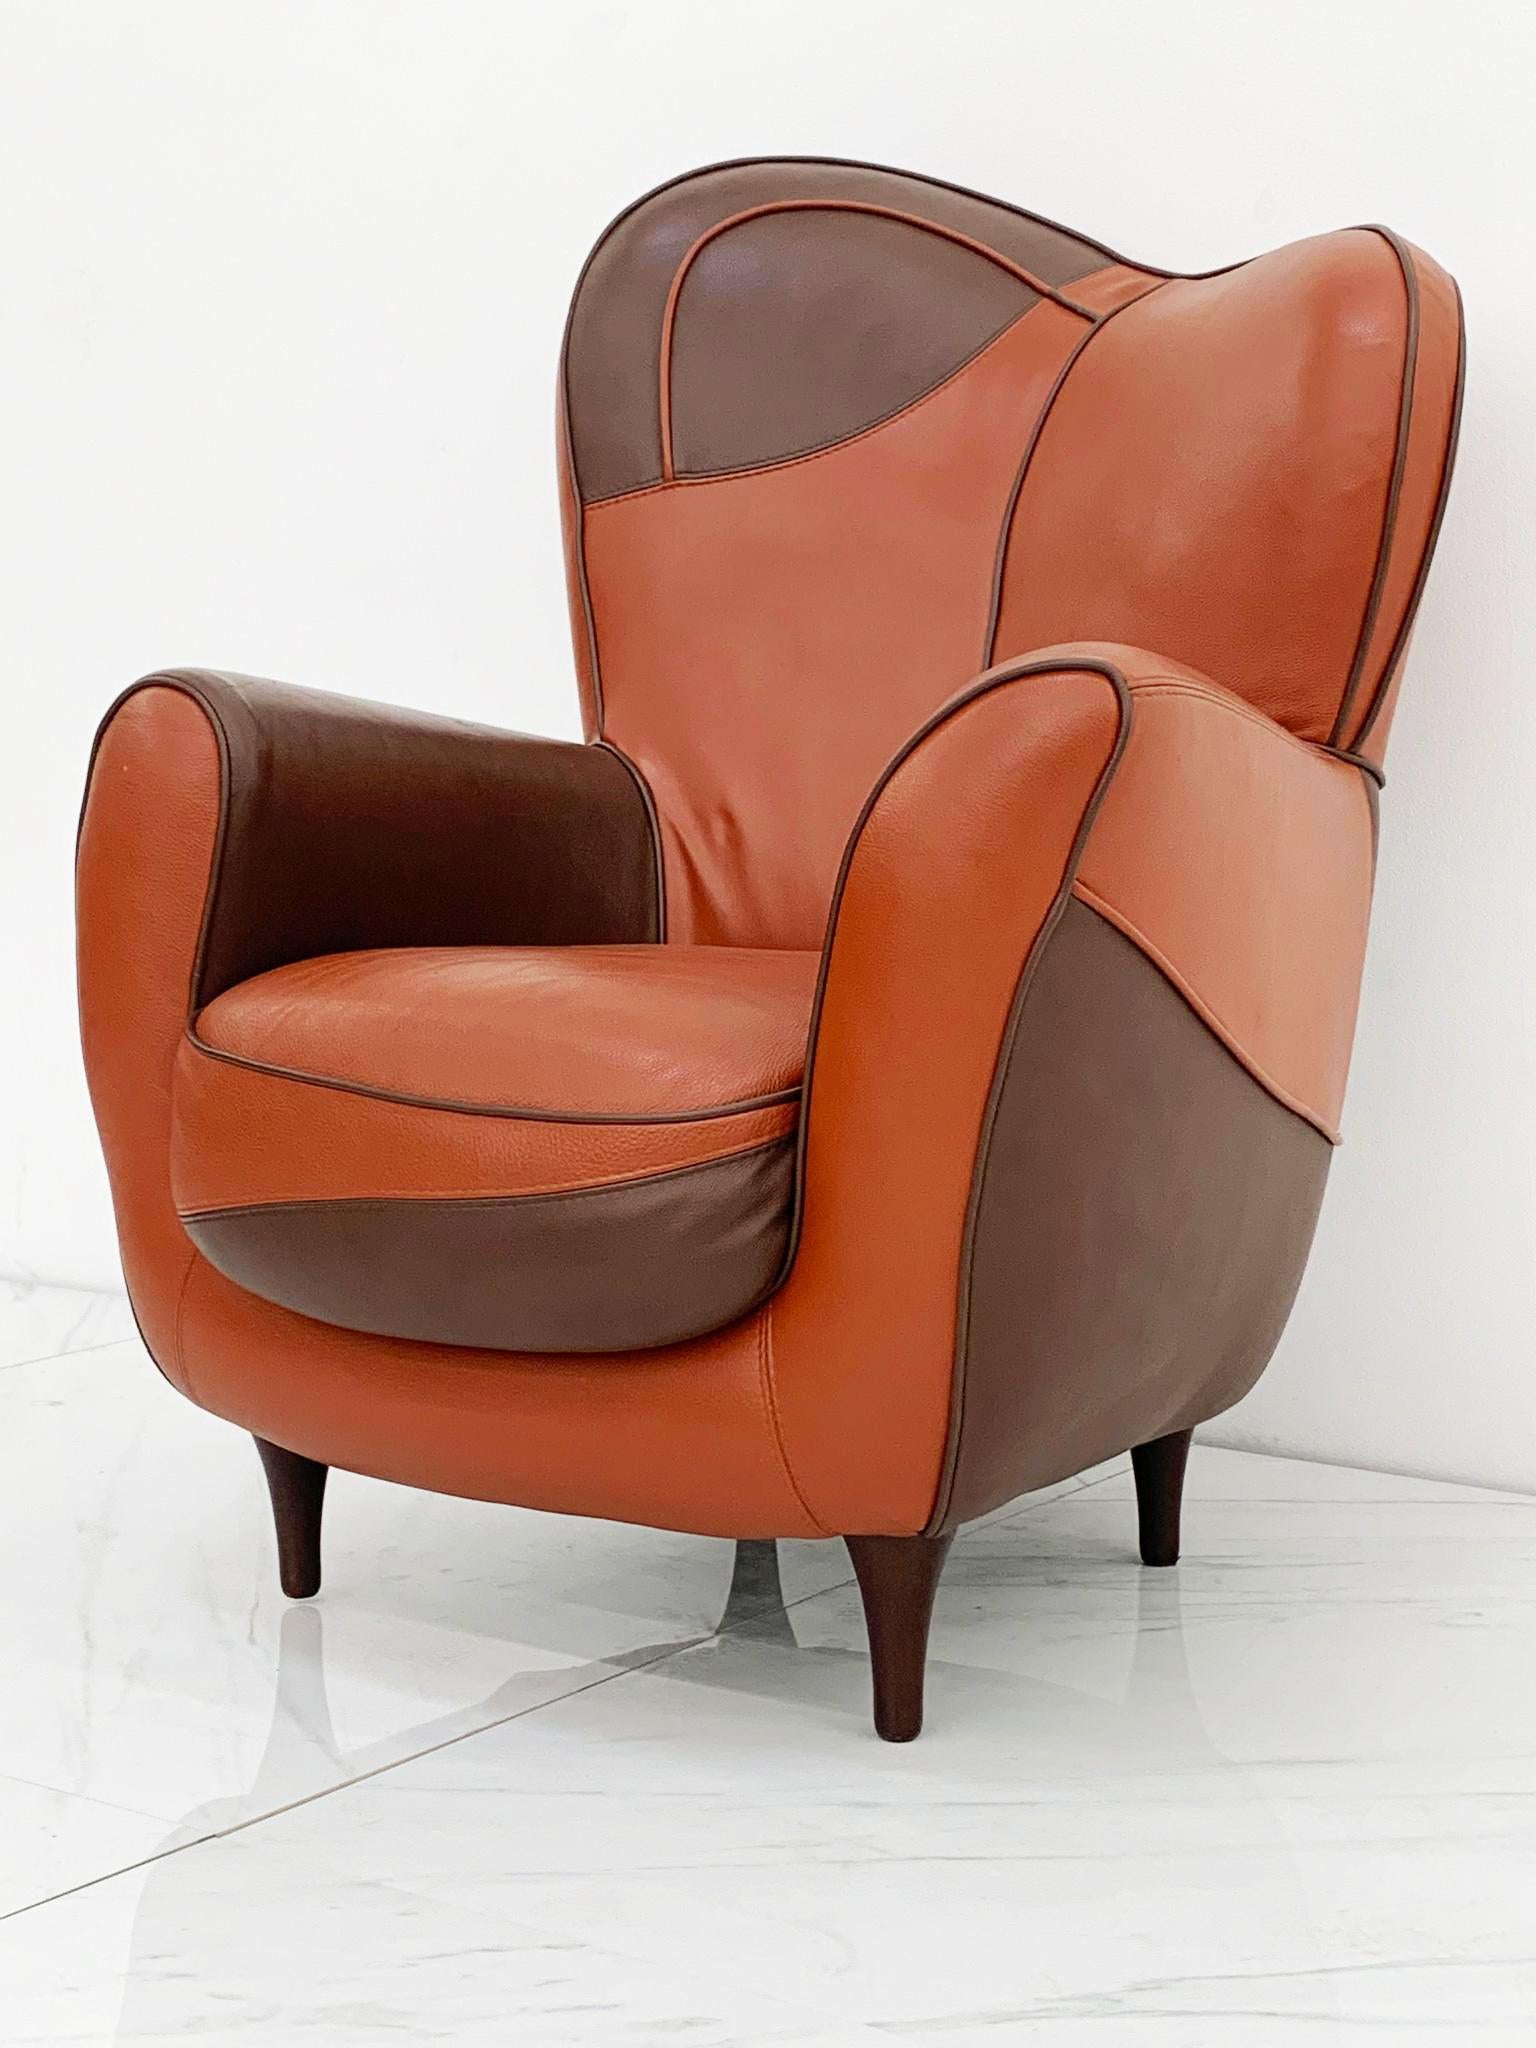 Javier Mariscal Poltrona Moroso Alessandra Leather Lounge Chair, 1995 In Good Condition In Culver City, CA